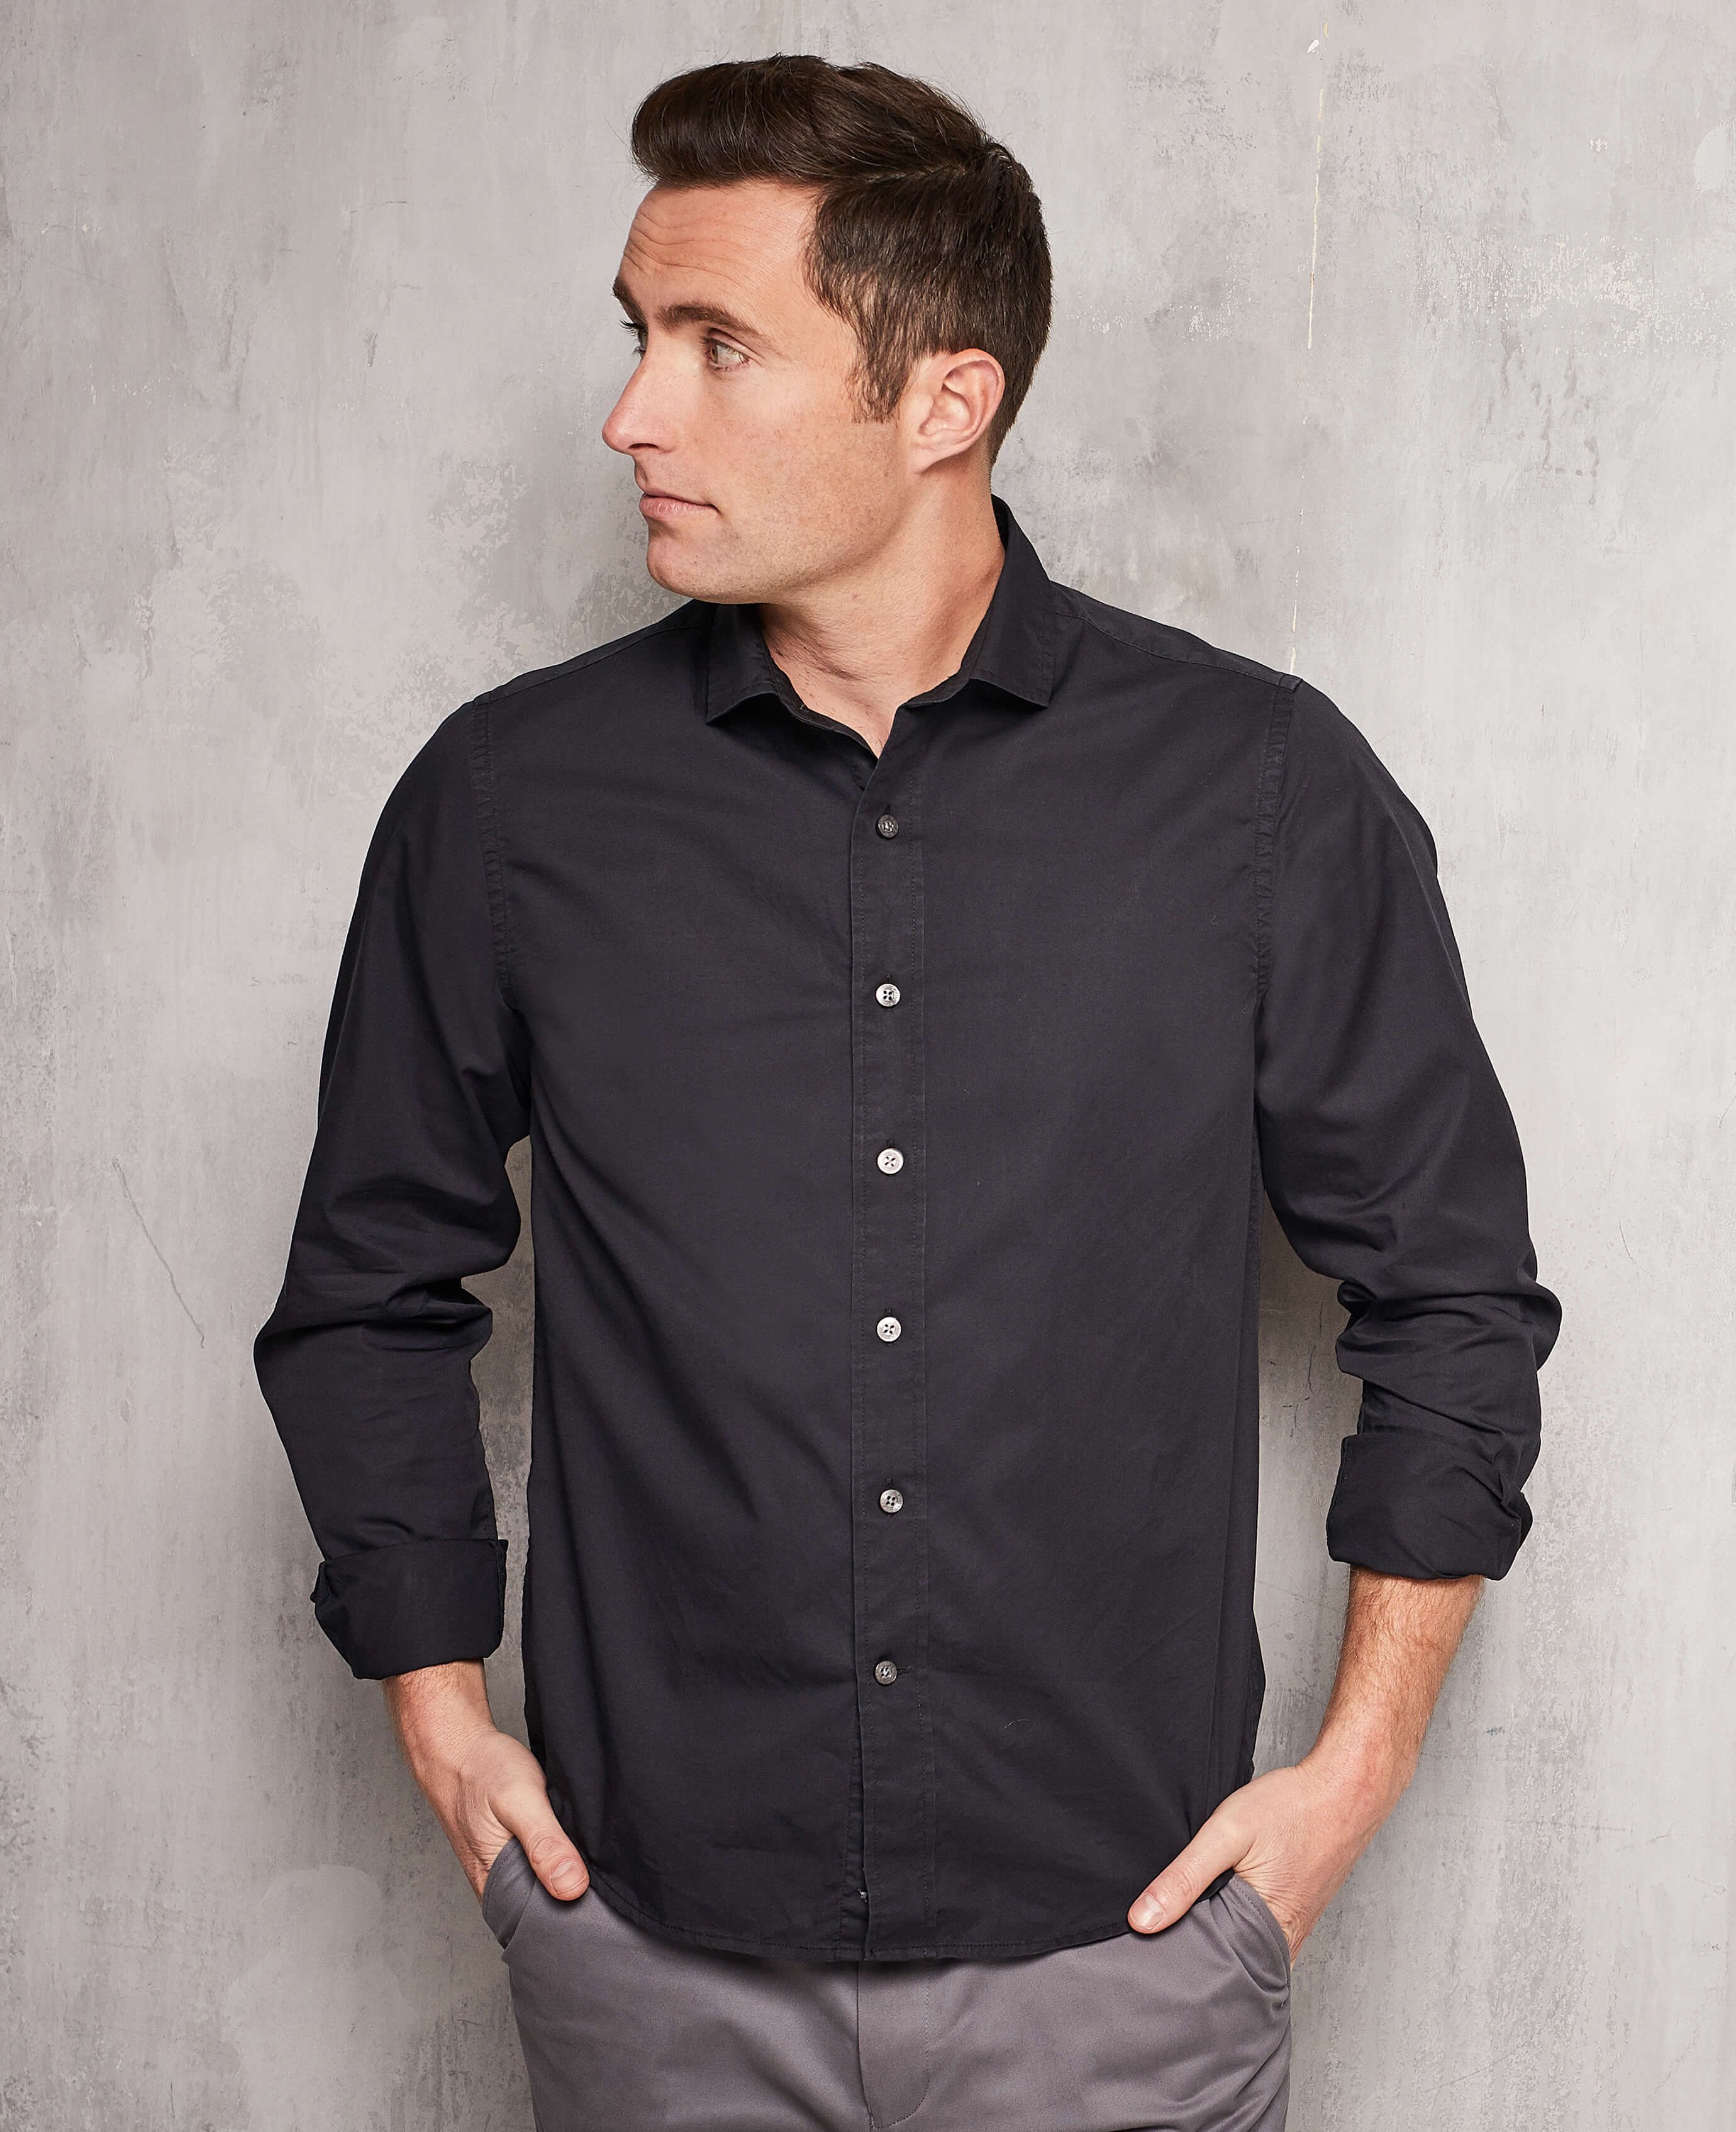 Men's Black Twill Slim Fit Casual Casual Shirt in Shorter Length ...